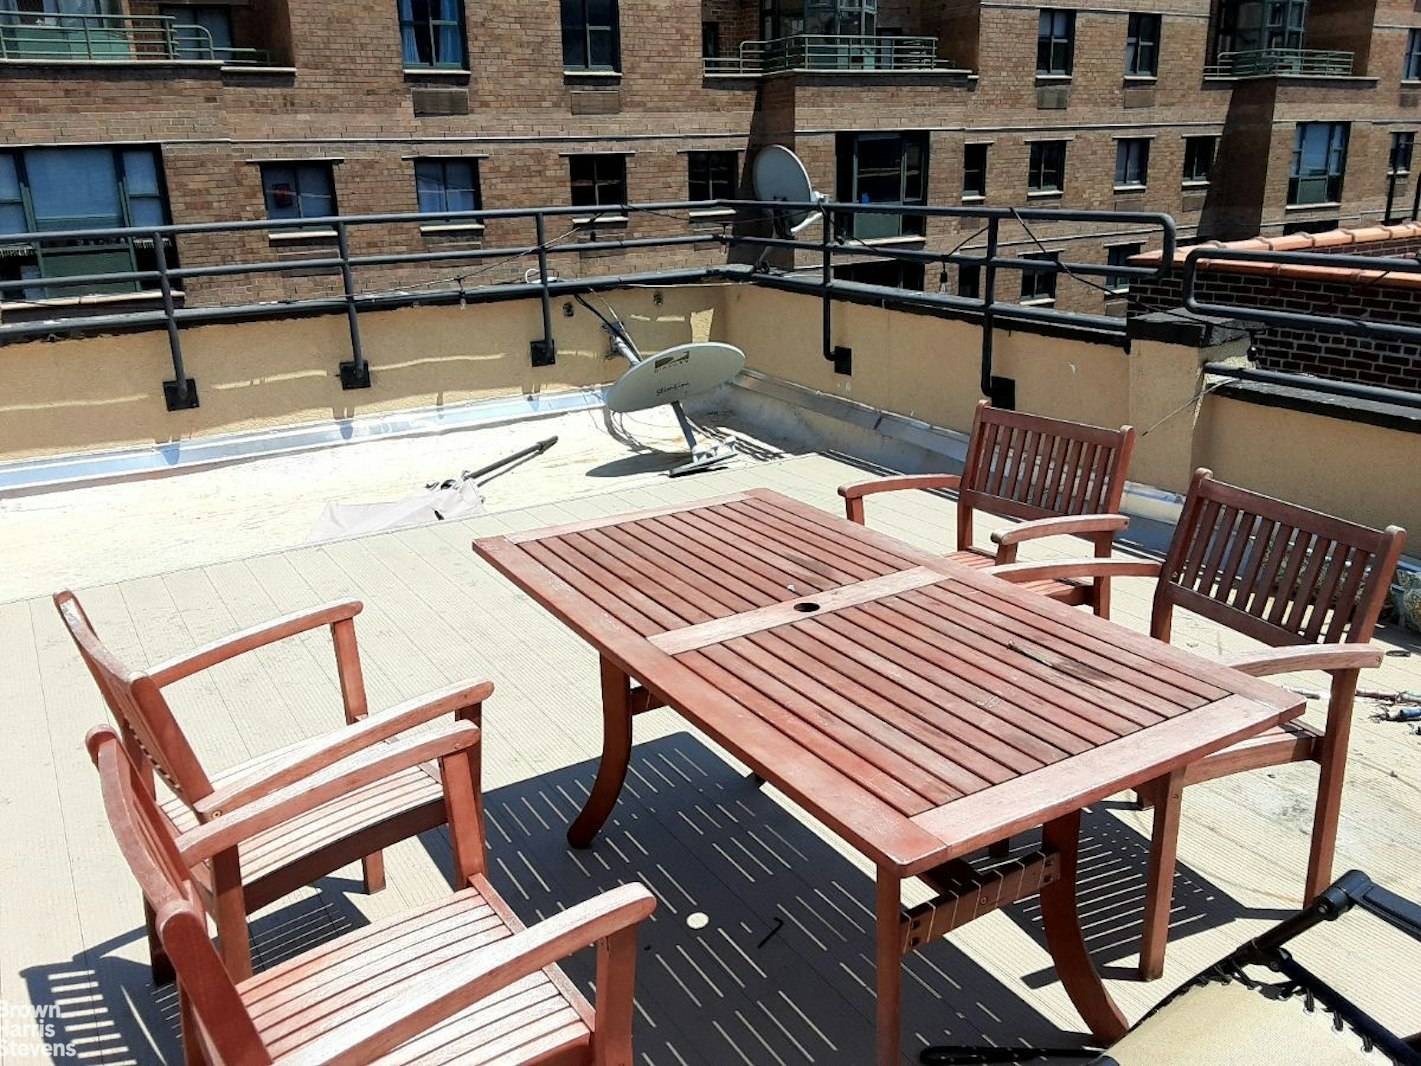 PRIVATE ROOFTOP DECK, AVAILABLE FOR JUNE 1NO DOGS ALLOWEDGORGEOUS RECENT RENOVATIONTHREE BEDROOMTWO FULL BATHS WITH IN UNIT LAUNDRYThis apartment is 5 flights up in a walkup.